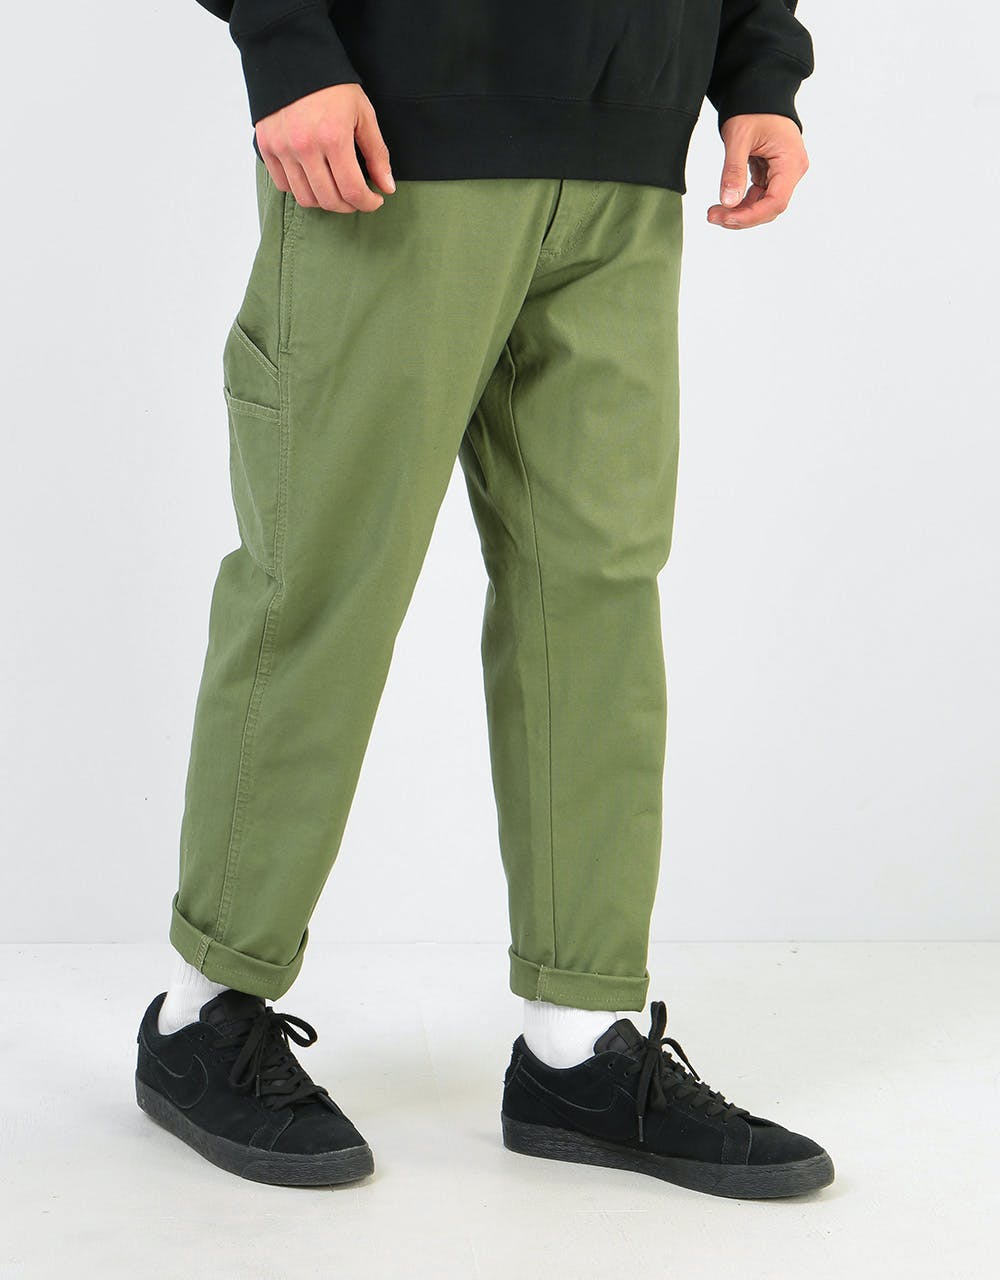 Obey Straggler Carpenter Pant III - Army